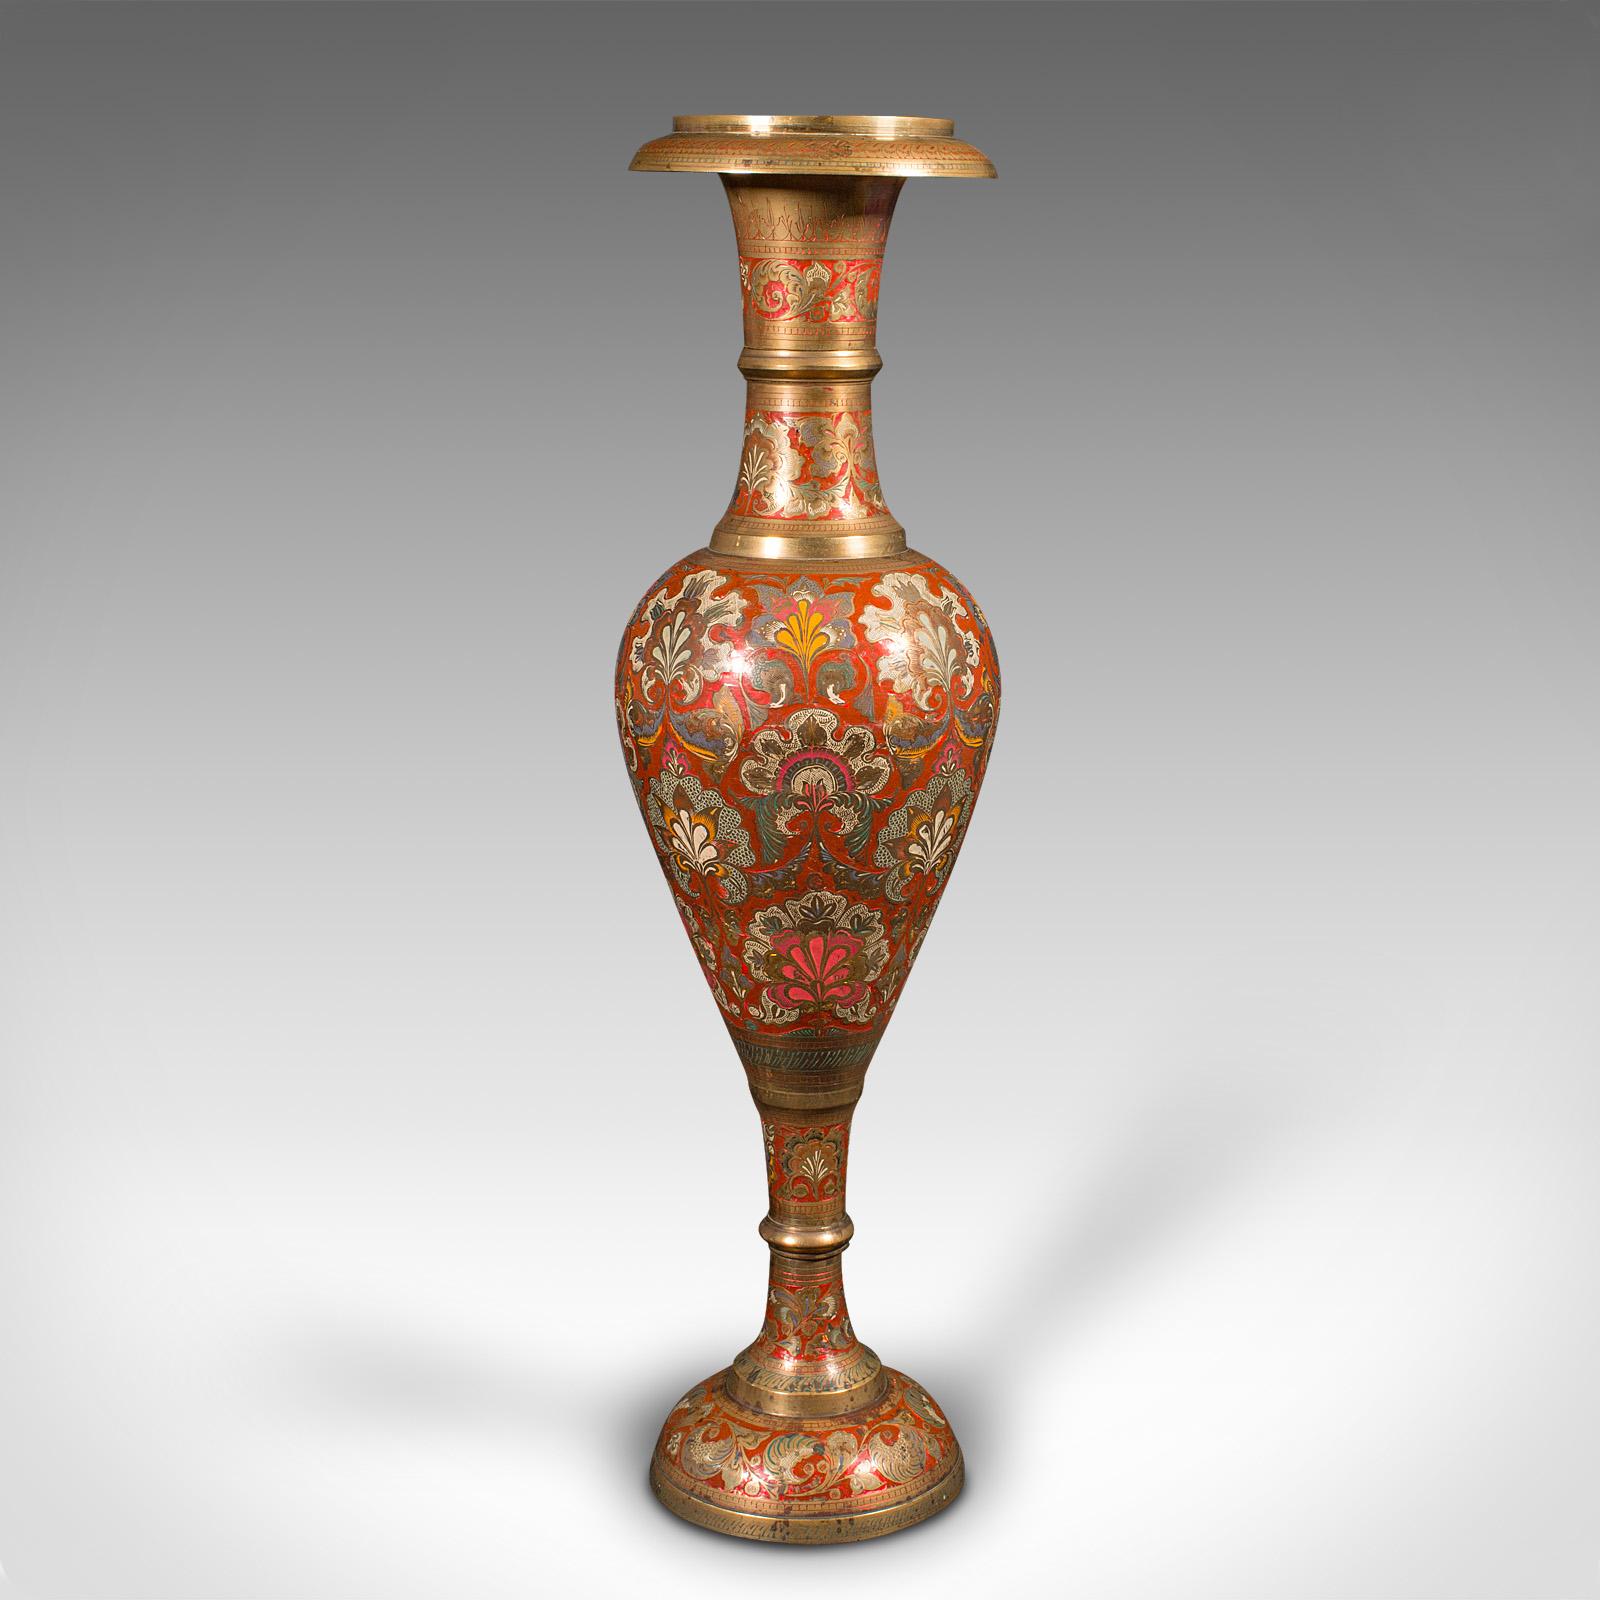 This is a tall vintage pampas grass vase. An Indian, polychrome enamelled brass display urn, dating to the mid 20th century, circa 1950.

Dramatic vase standing at an impressive height of 2.65 feet (32'')
Displaying a desirable aged patina and in